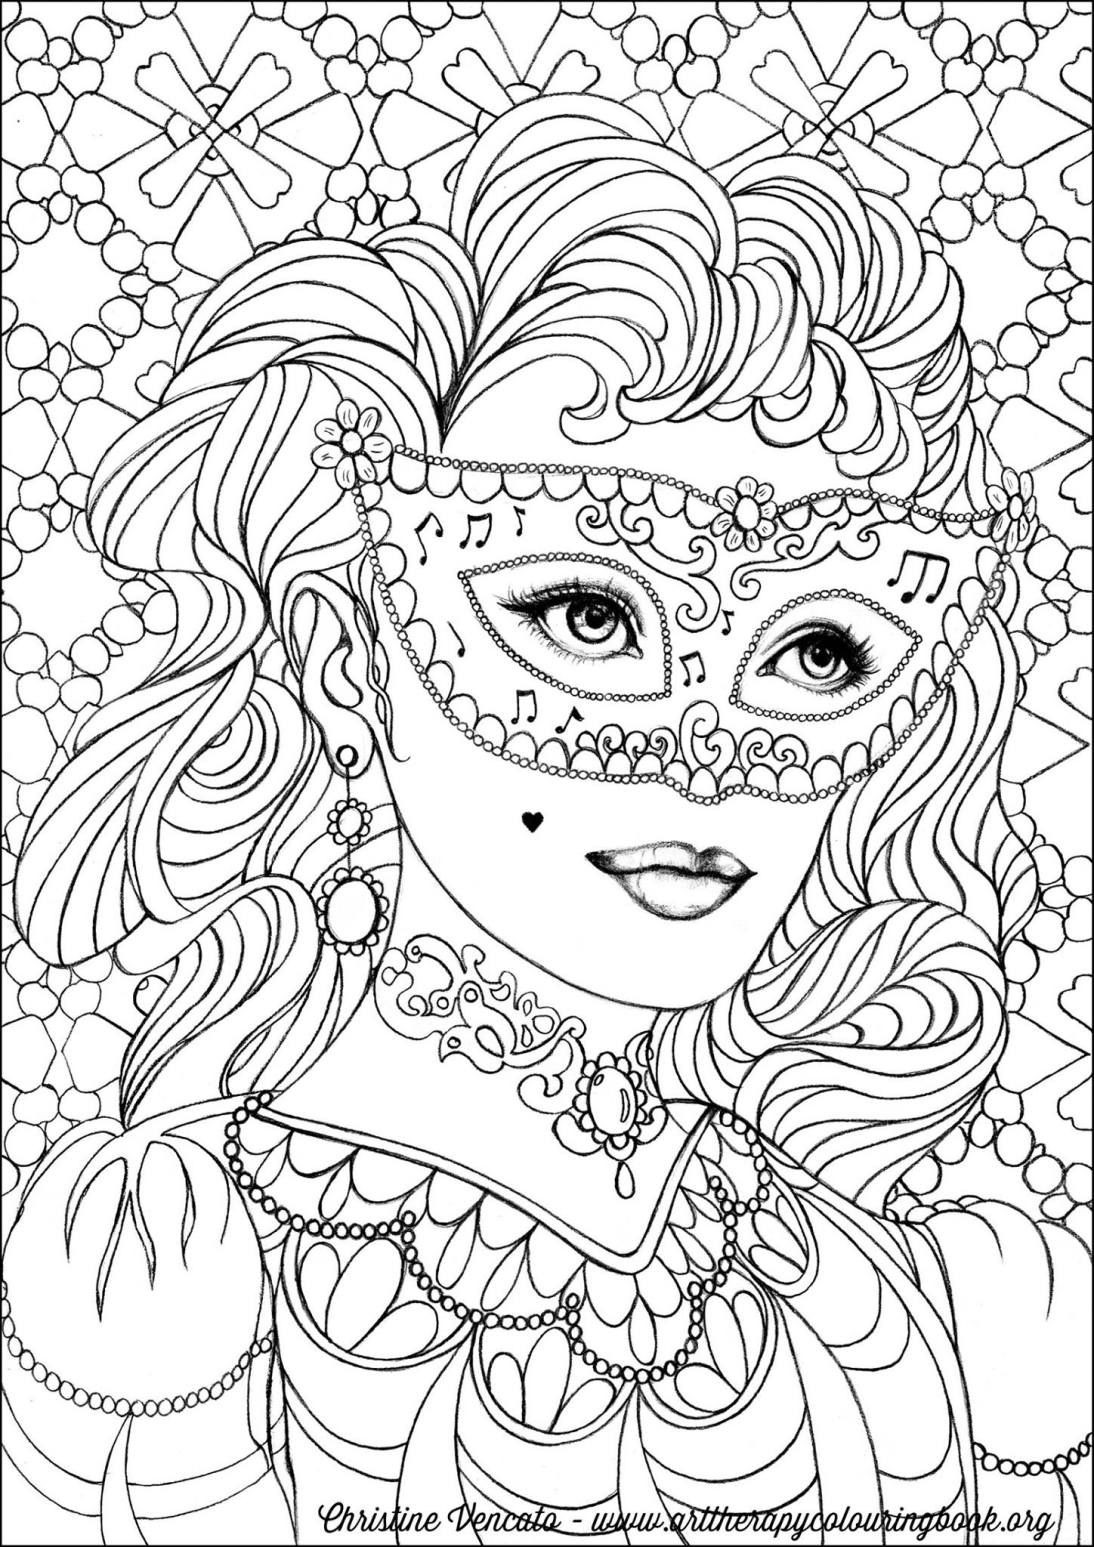 Online Adult Coloring Books
 Free Coloring Page From Adult Coloring Worldwide Art by